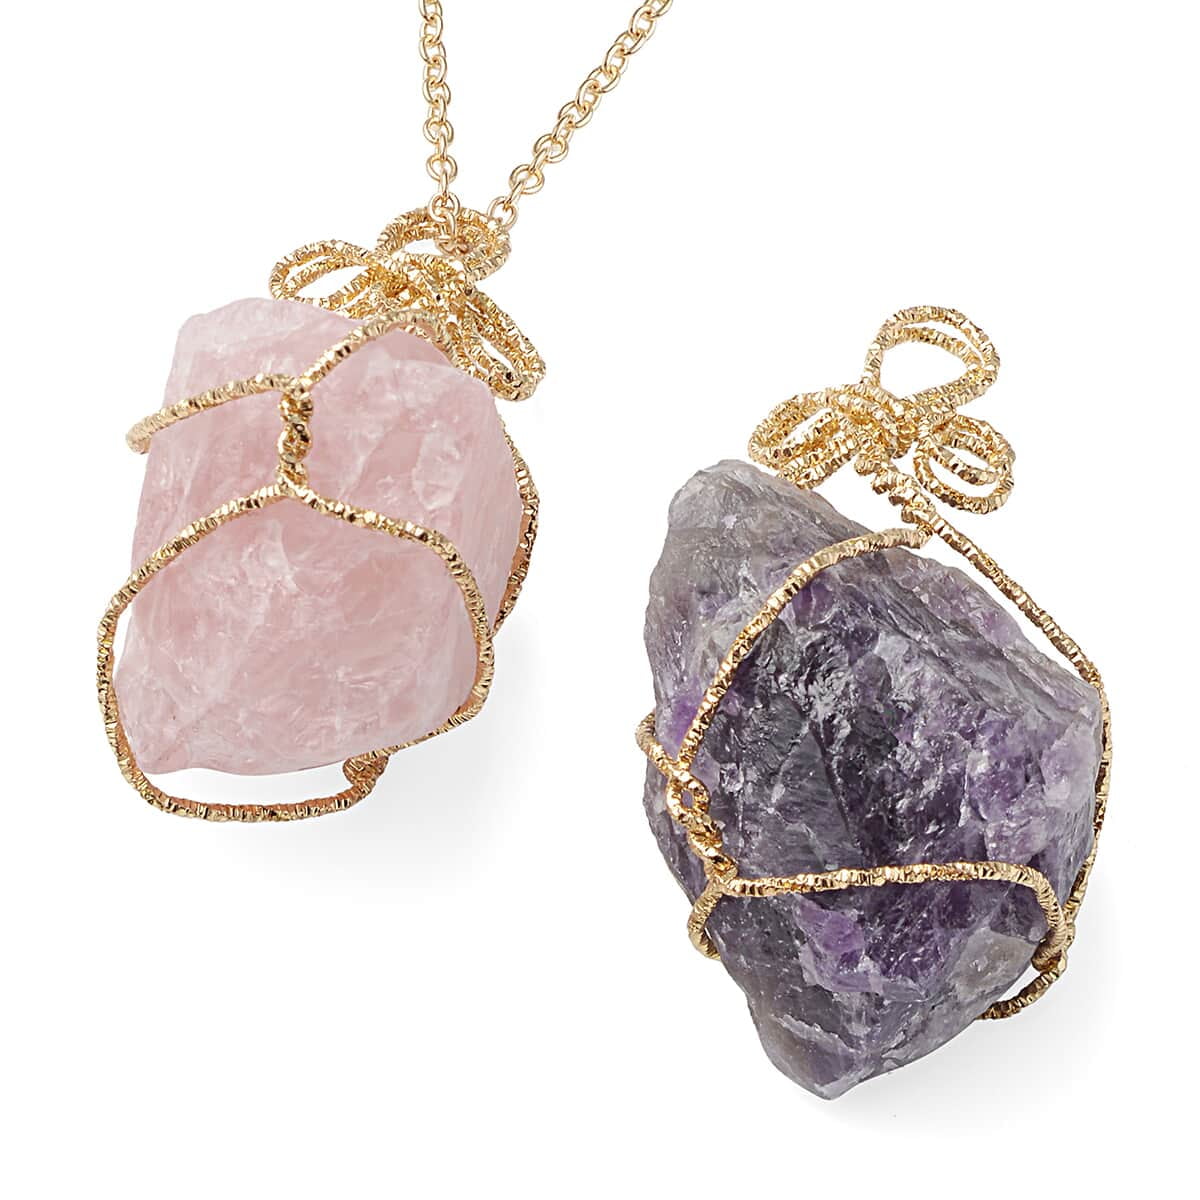 February Highlight - Amethyst: The Crystal For General Health and